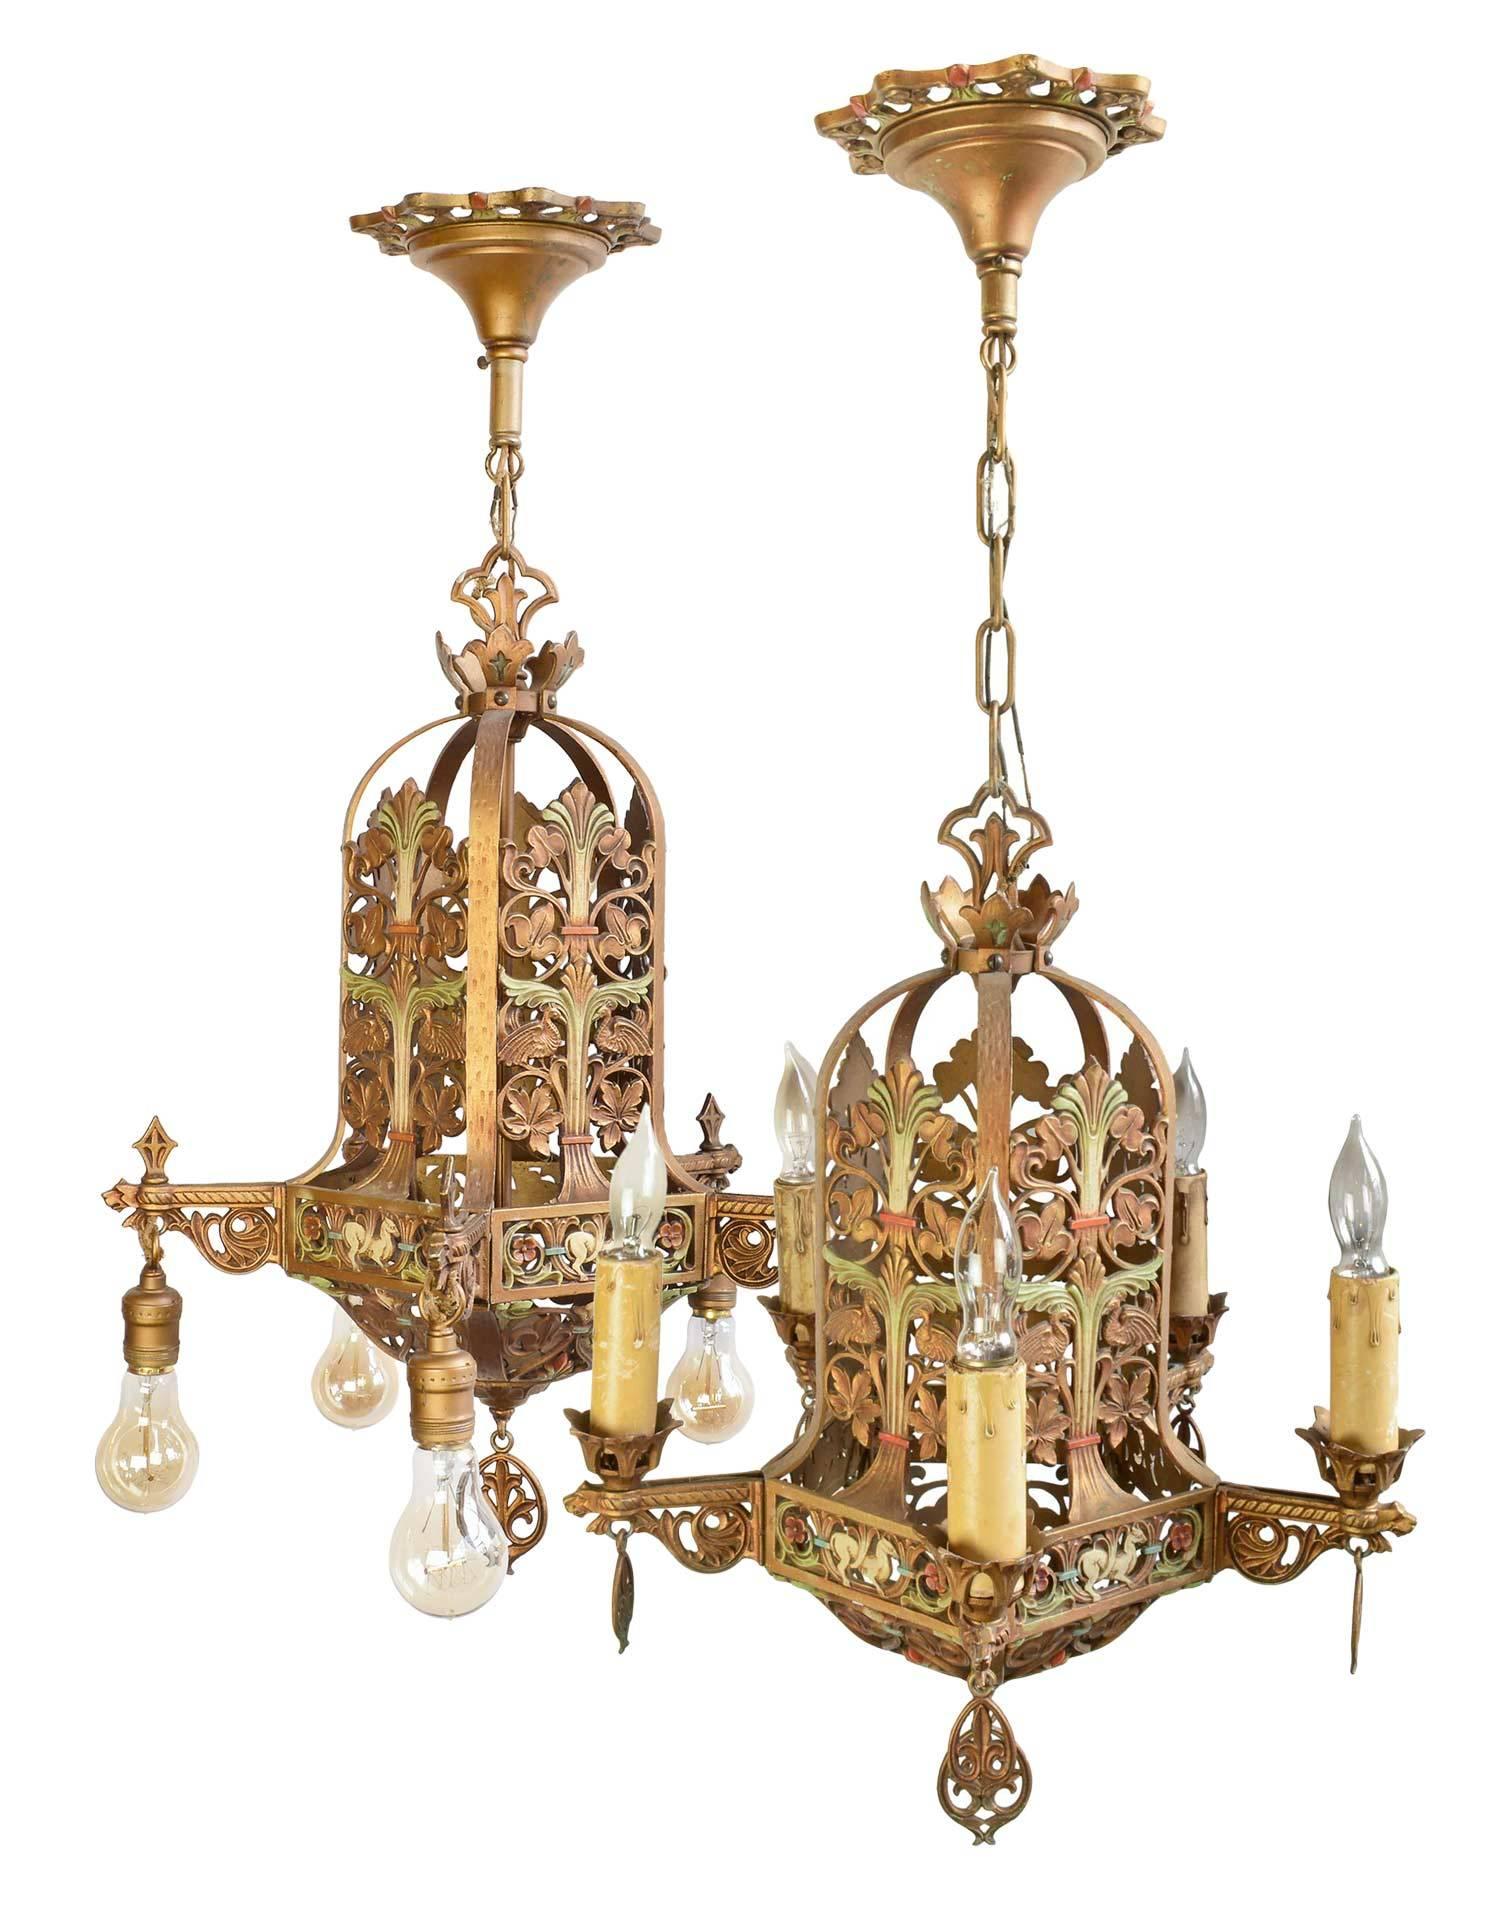 Entire suite of matching decorative polychrome fixtures with deco floral and leaf detail throughout, featuring fleur-de-lis, lion, goat and bird emblems.

Includes pendant, pair of sconces, and two five-light chandeliers.